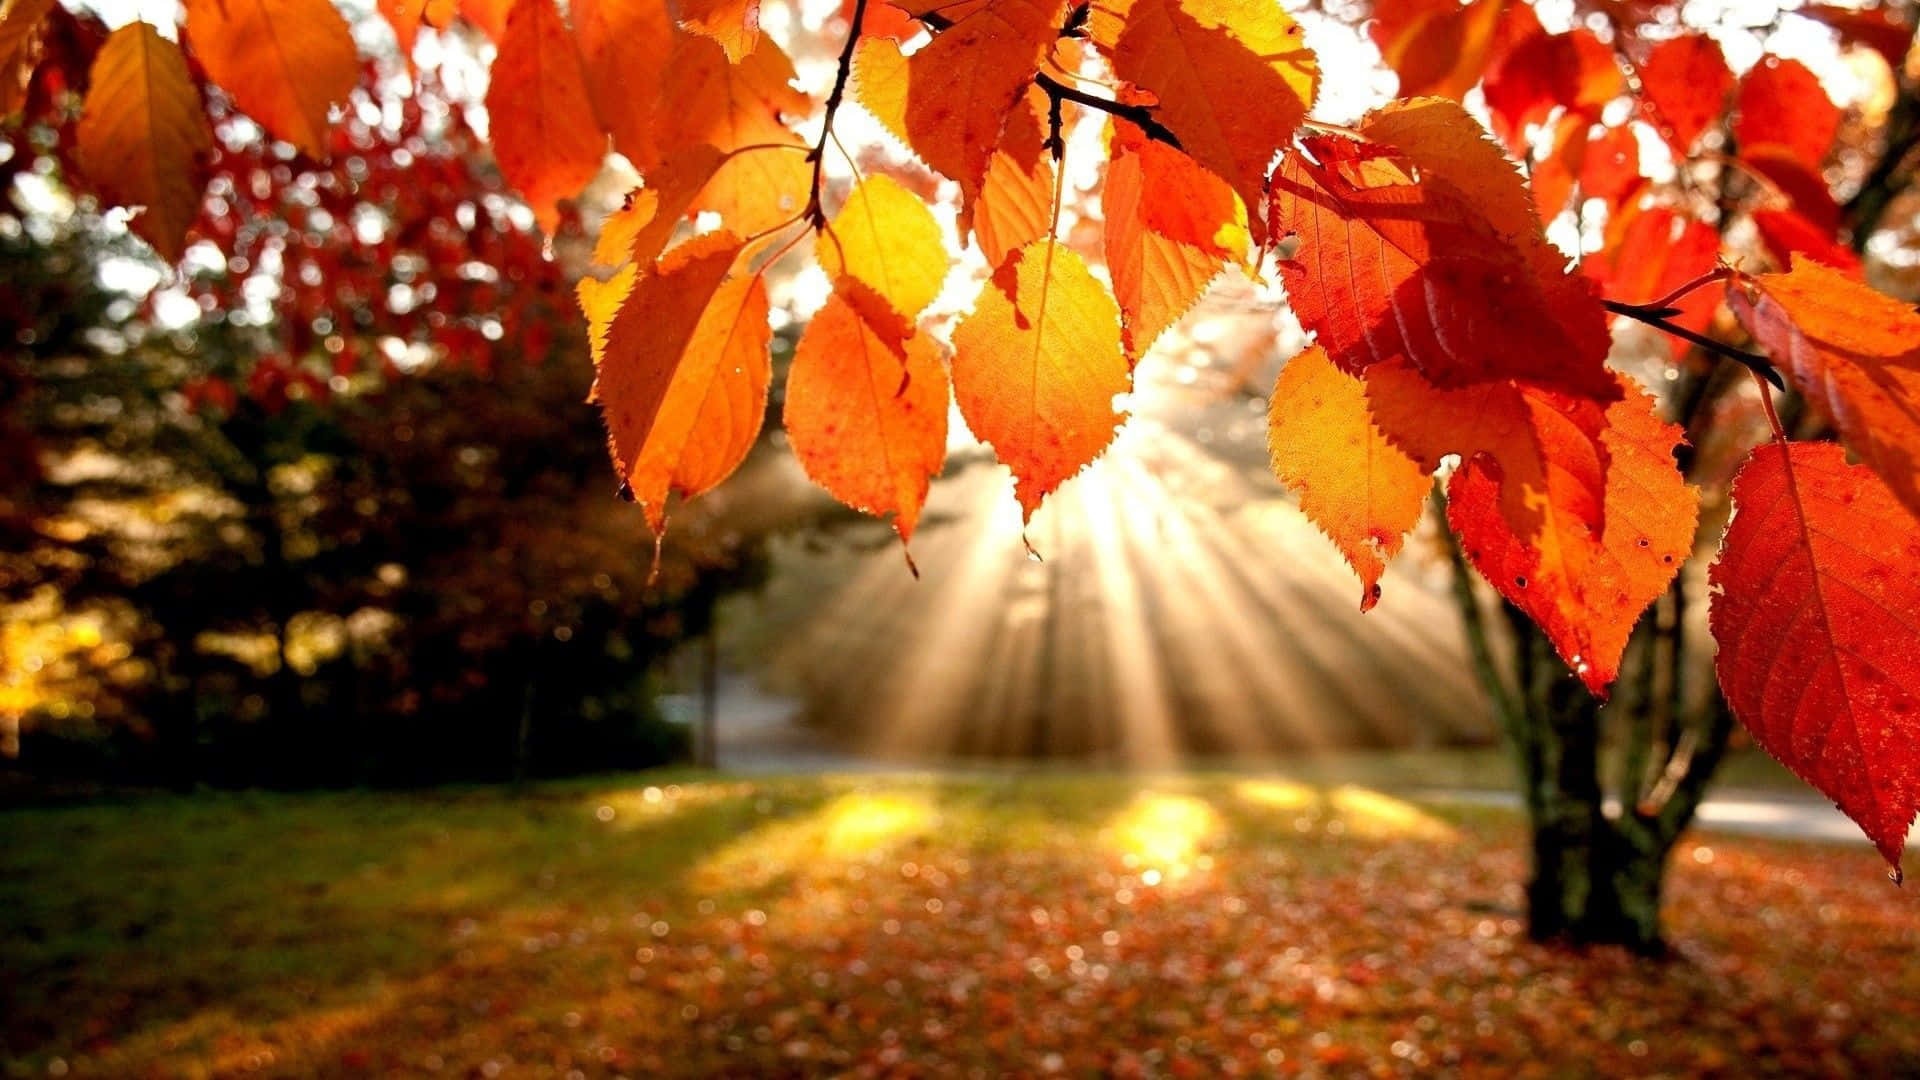 Sunlight And Beautiful Fall Tree Pictures 1920 x 1080 Picture